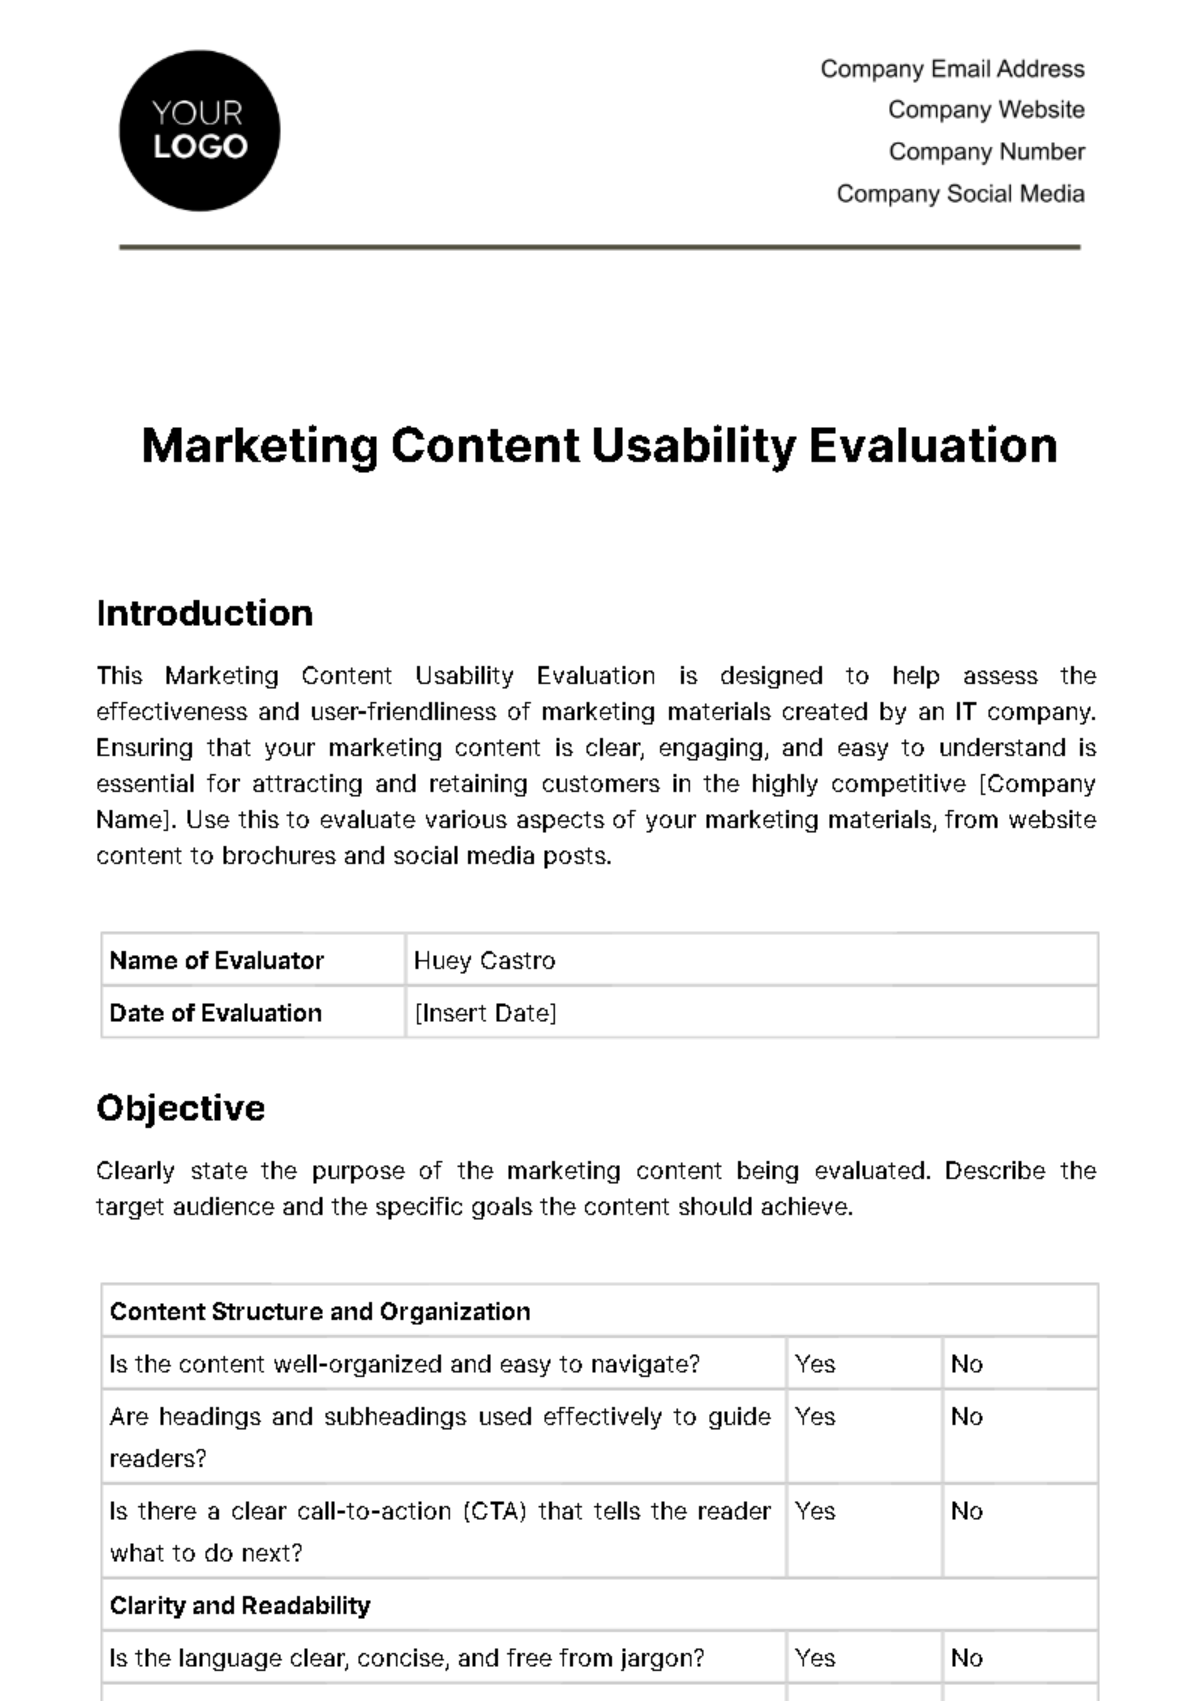 Free Marketing Content Usability Evaluation Template